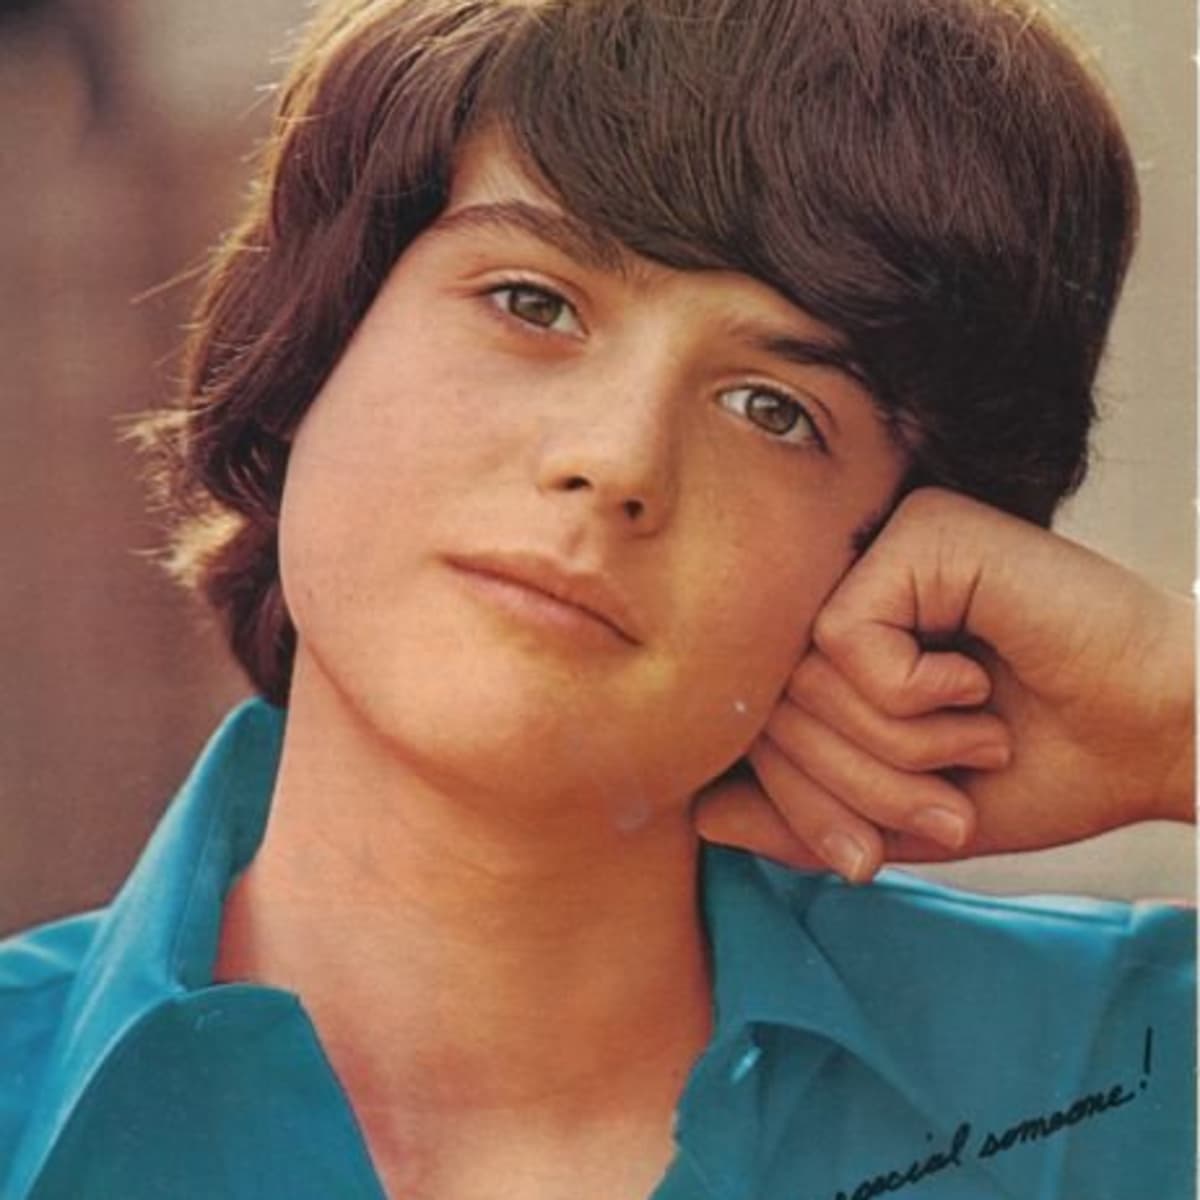 Top 5 Donny Osmond Songs From the 1970s - Spinditty